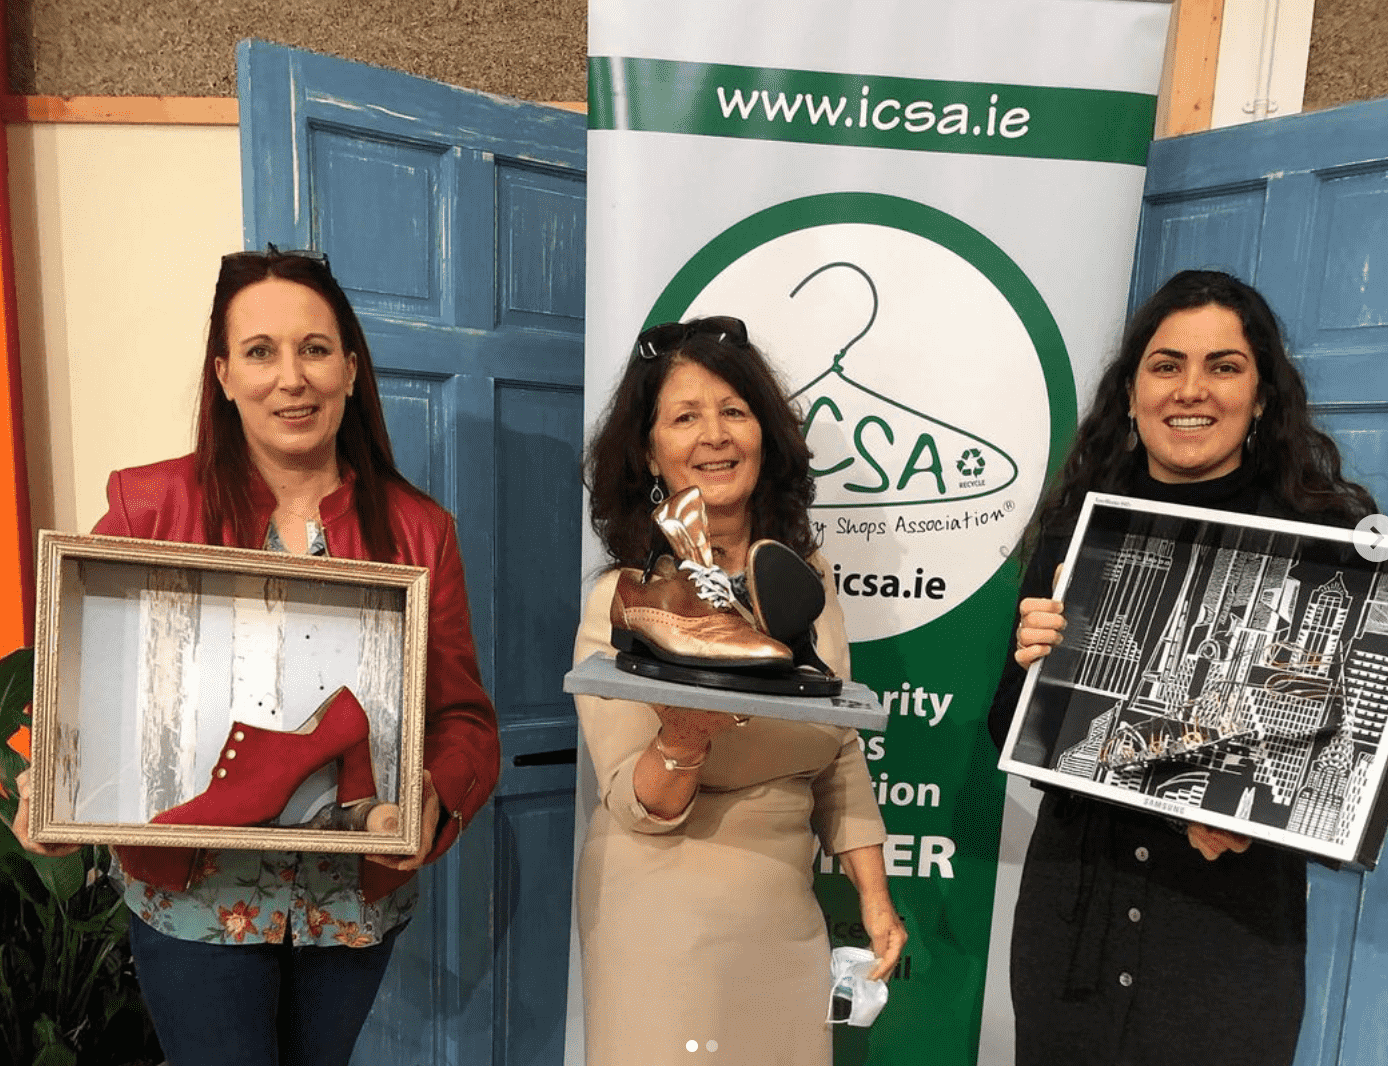 Our charity shop won three awards in the chariy retail ireland competion 2022